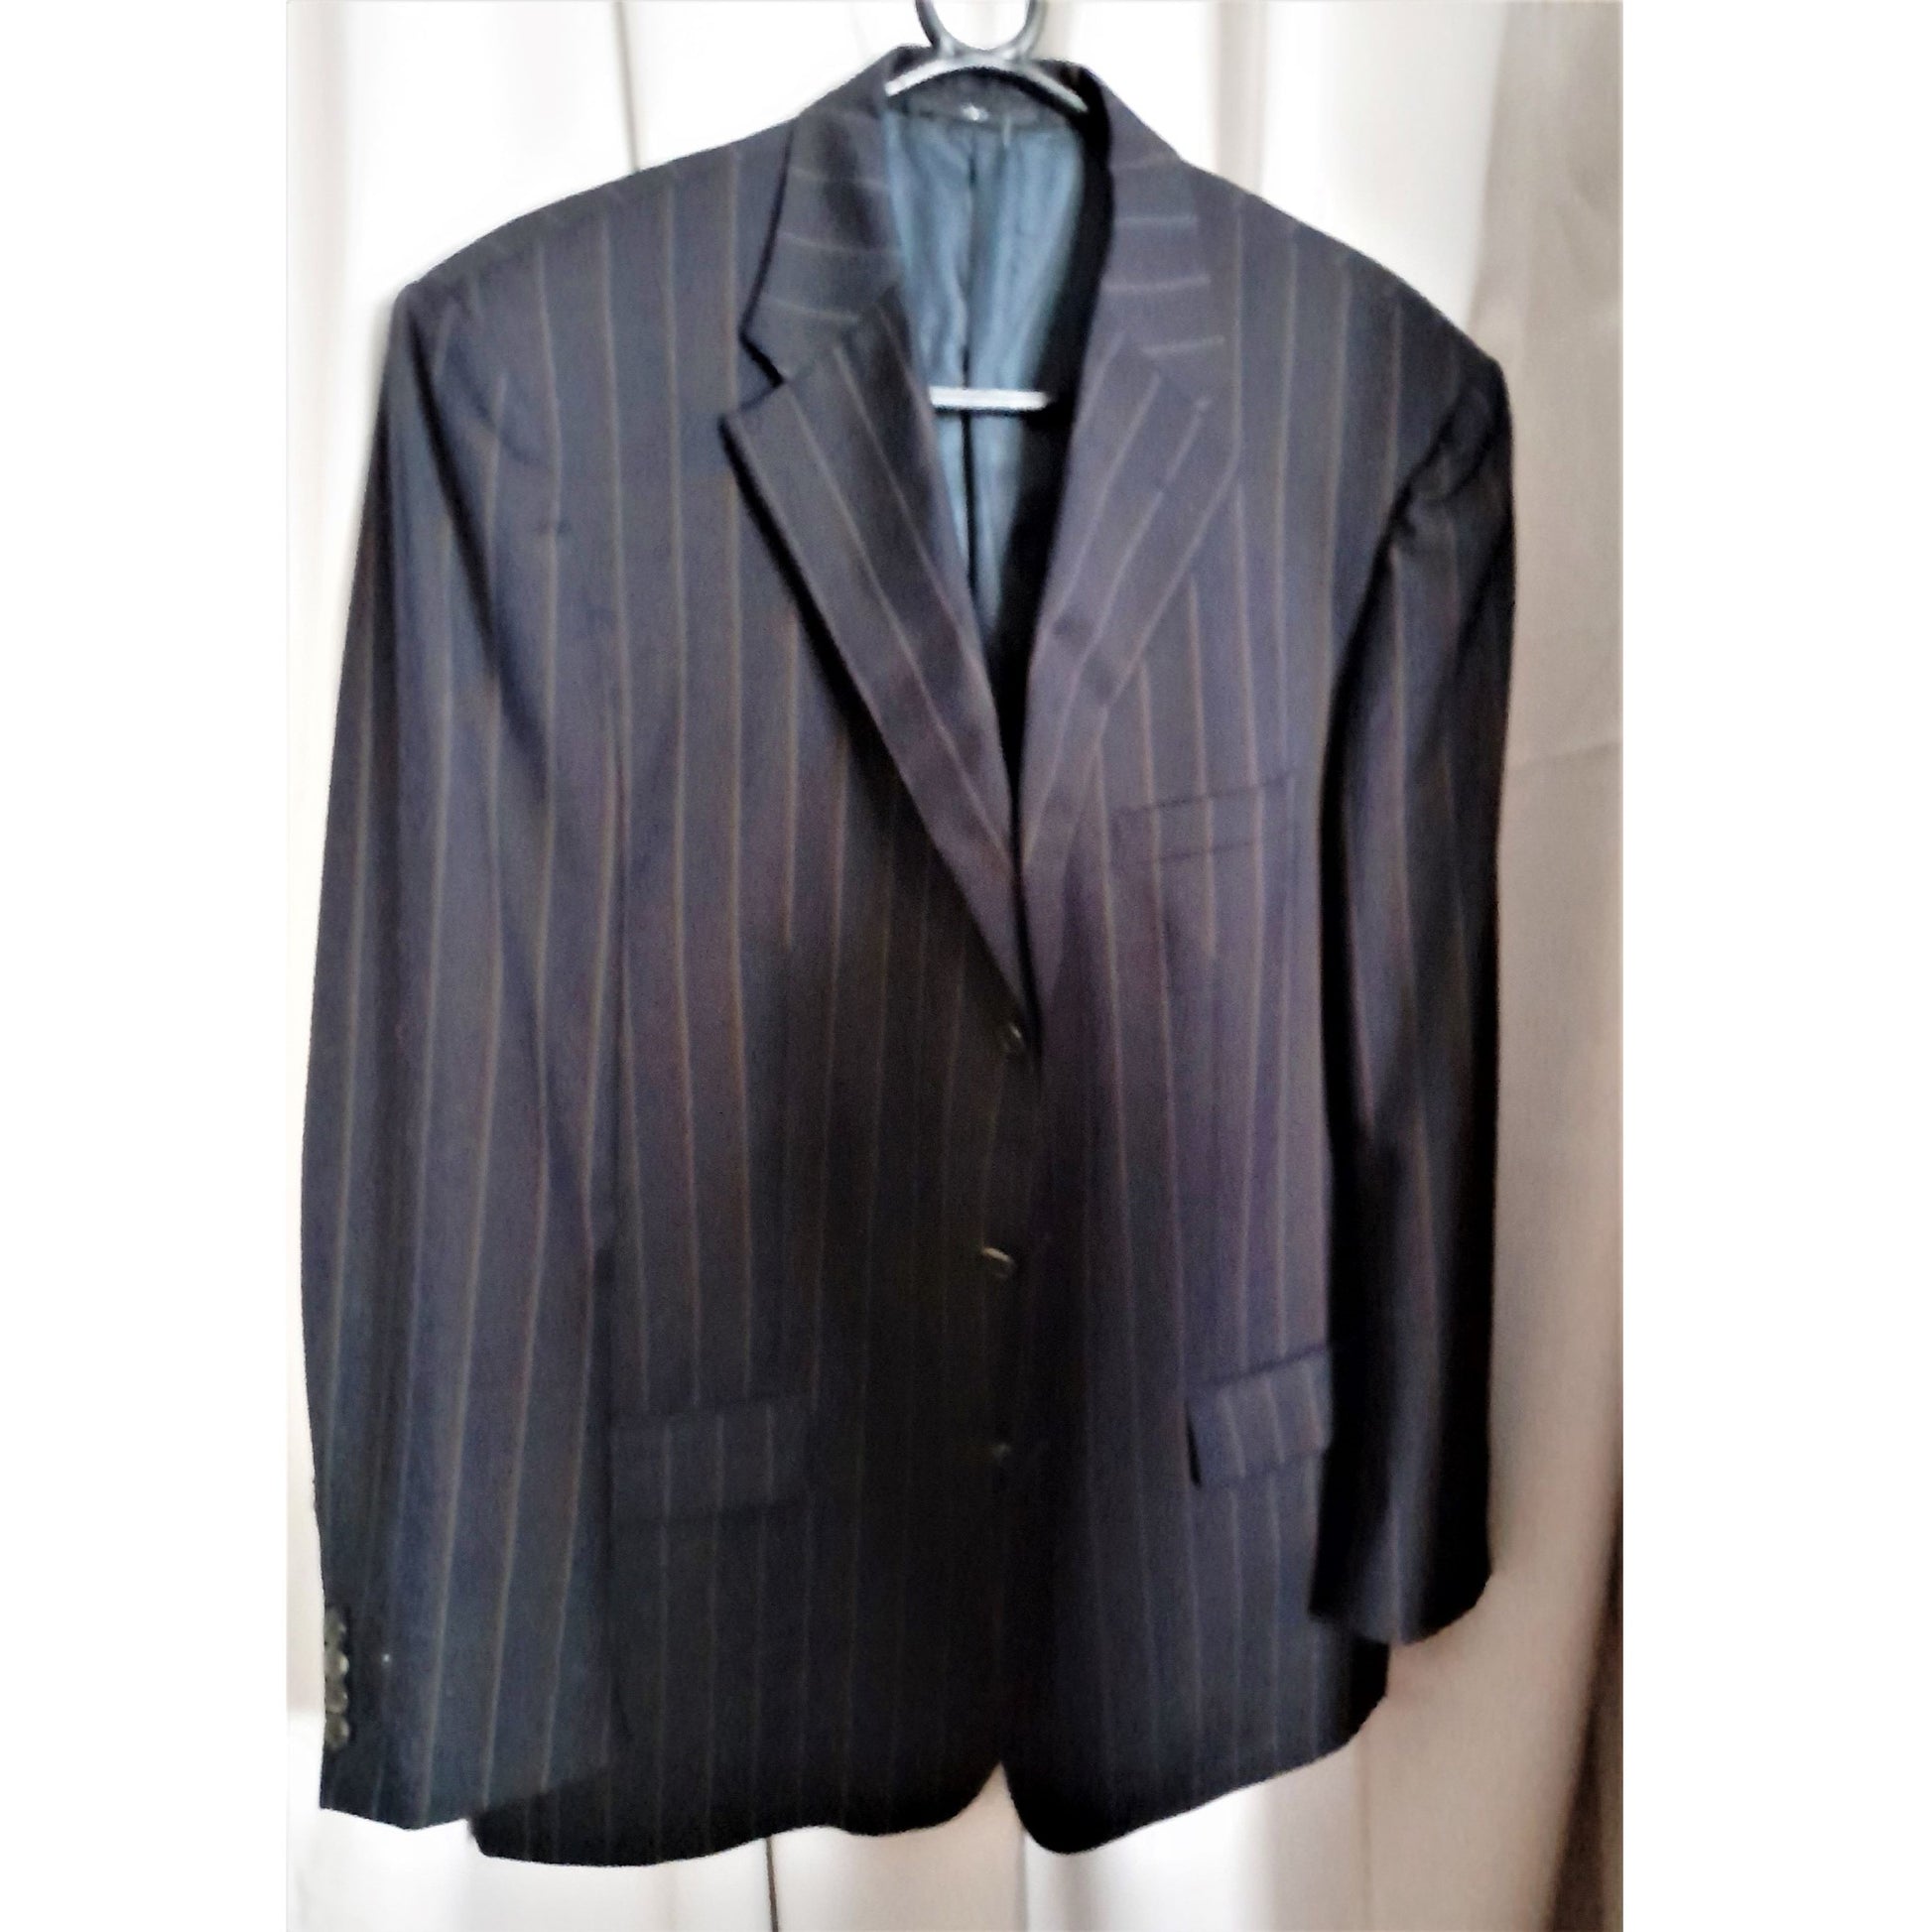 Valentino Black Gold Stripe Wool Jacket Size 54" Chest Shop for